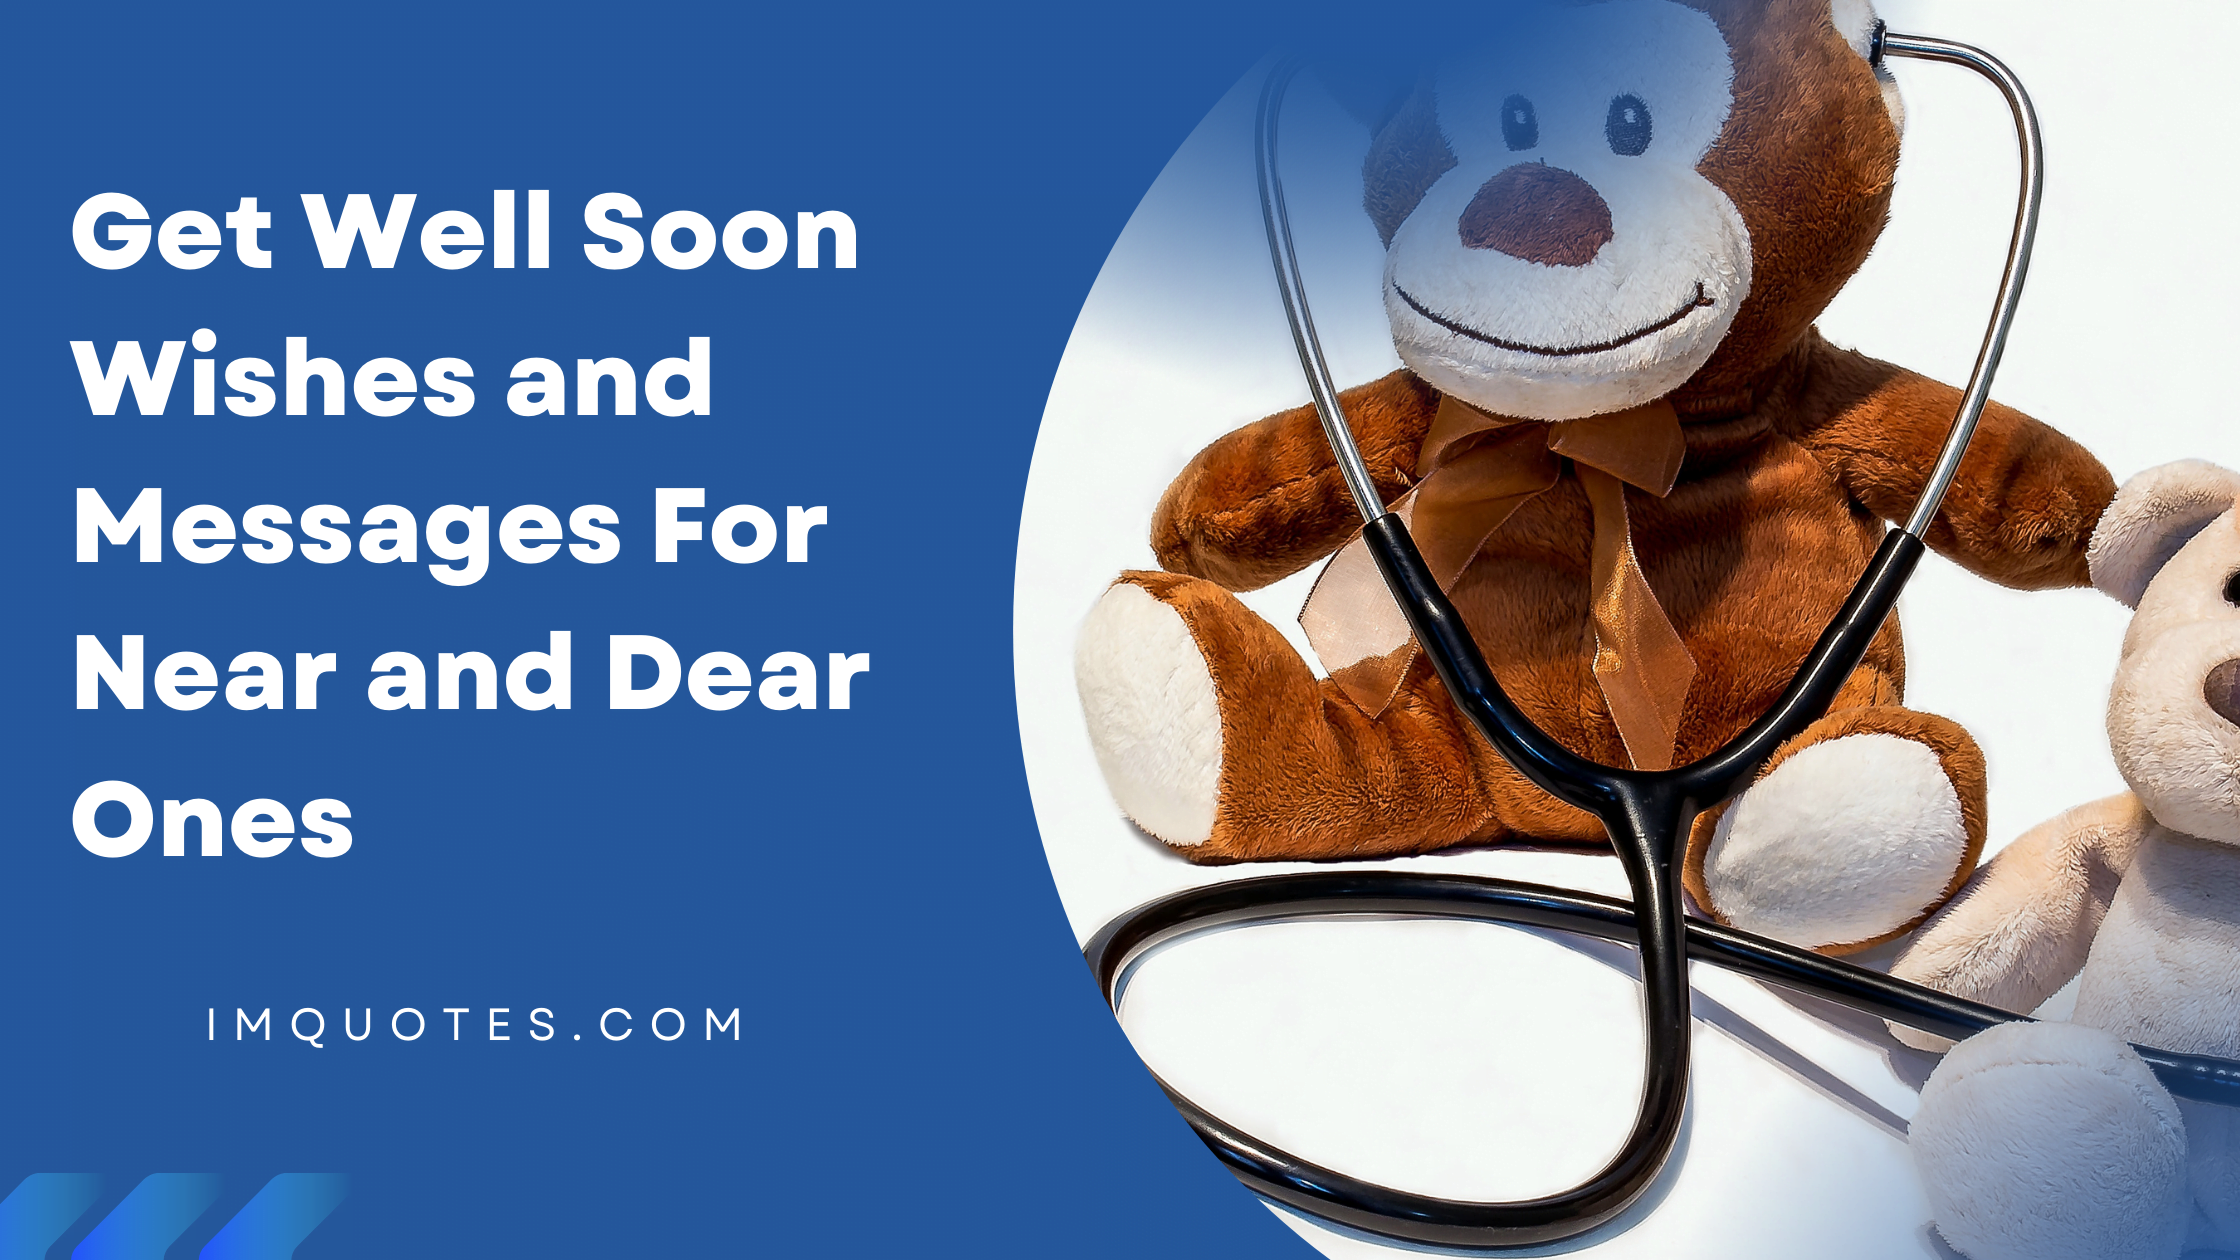 Get Well Soon Wishes and Messages For Near and Dear Ones